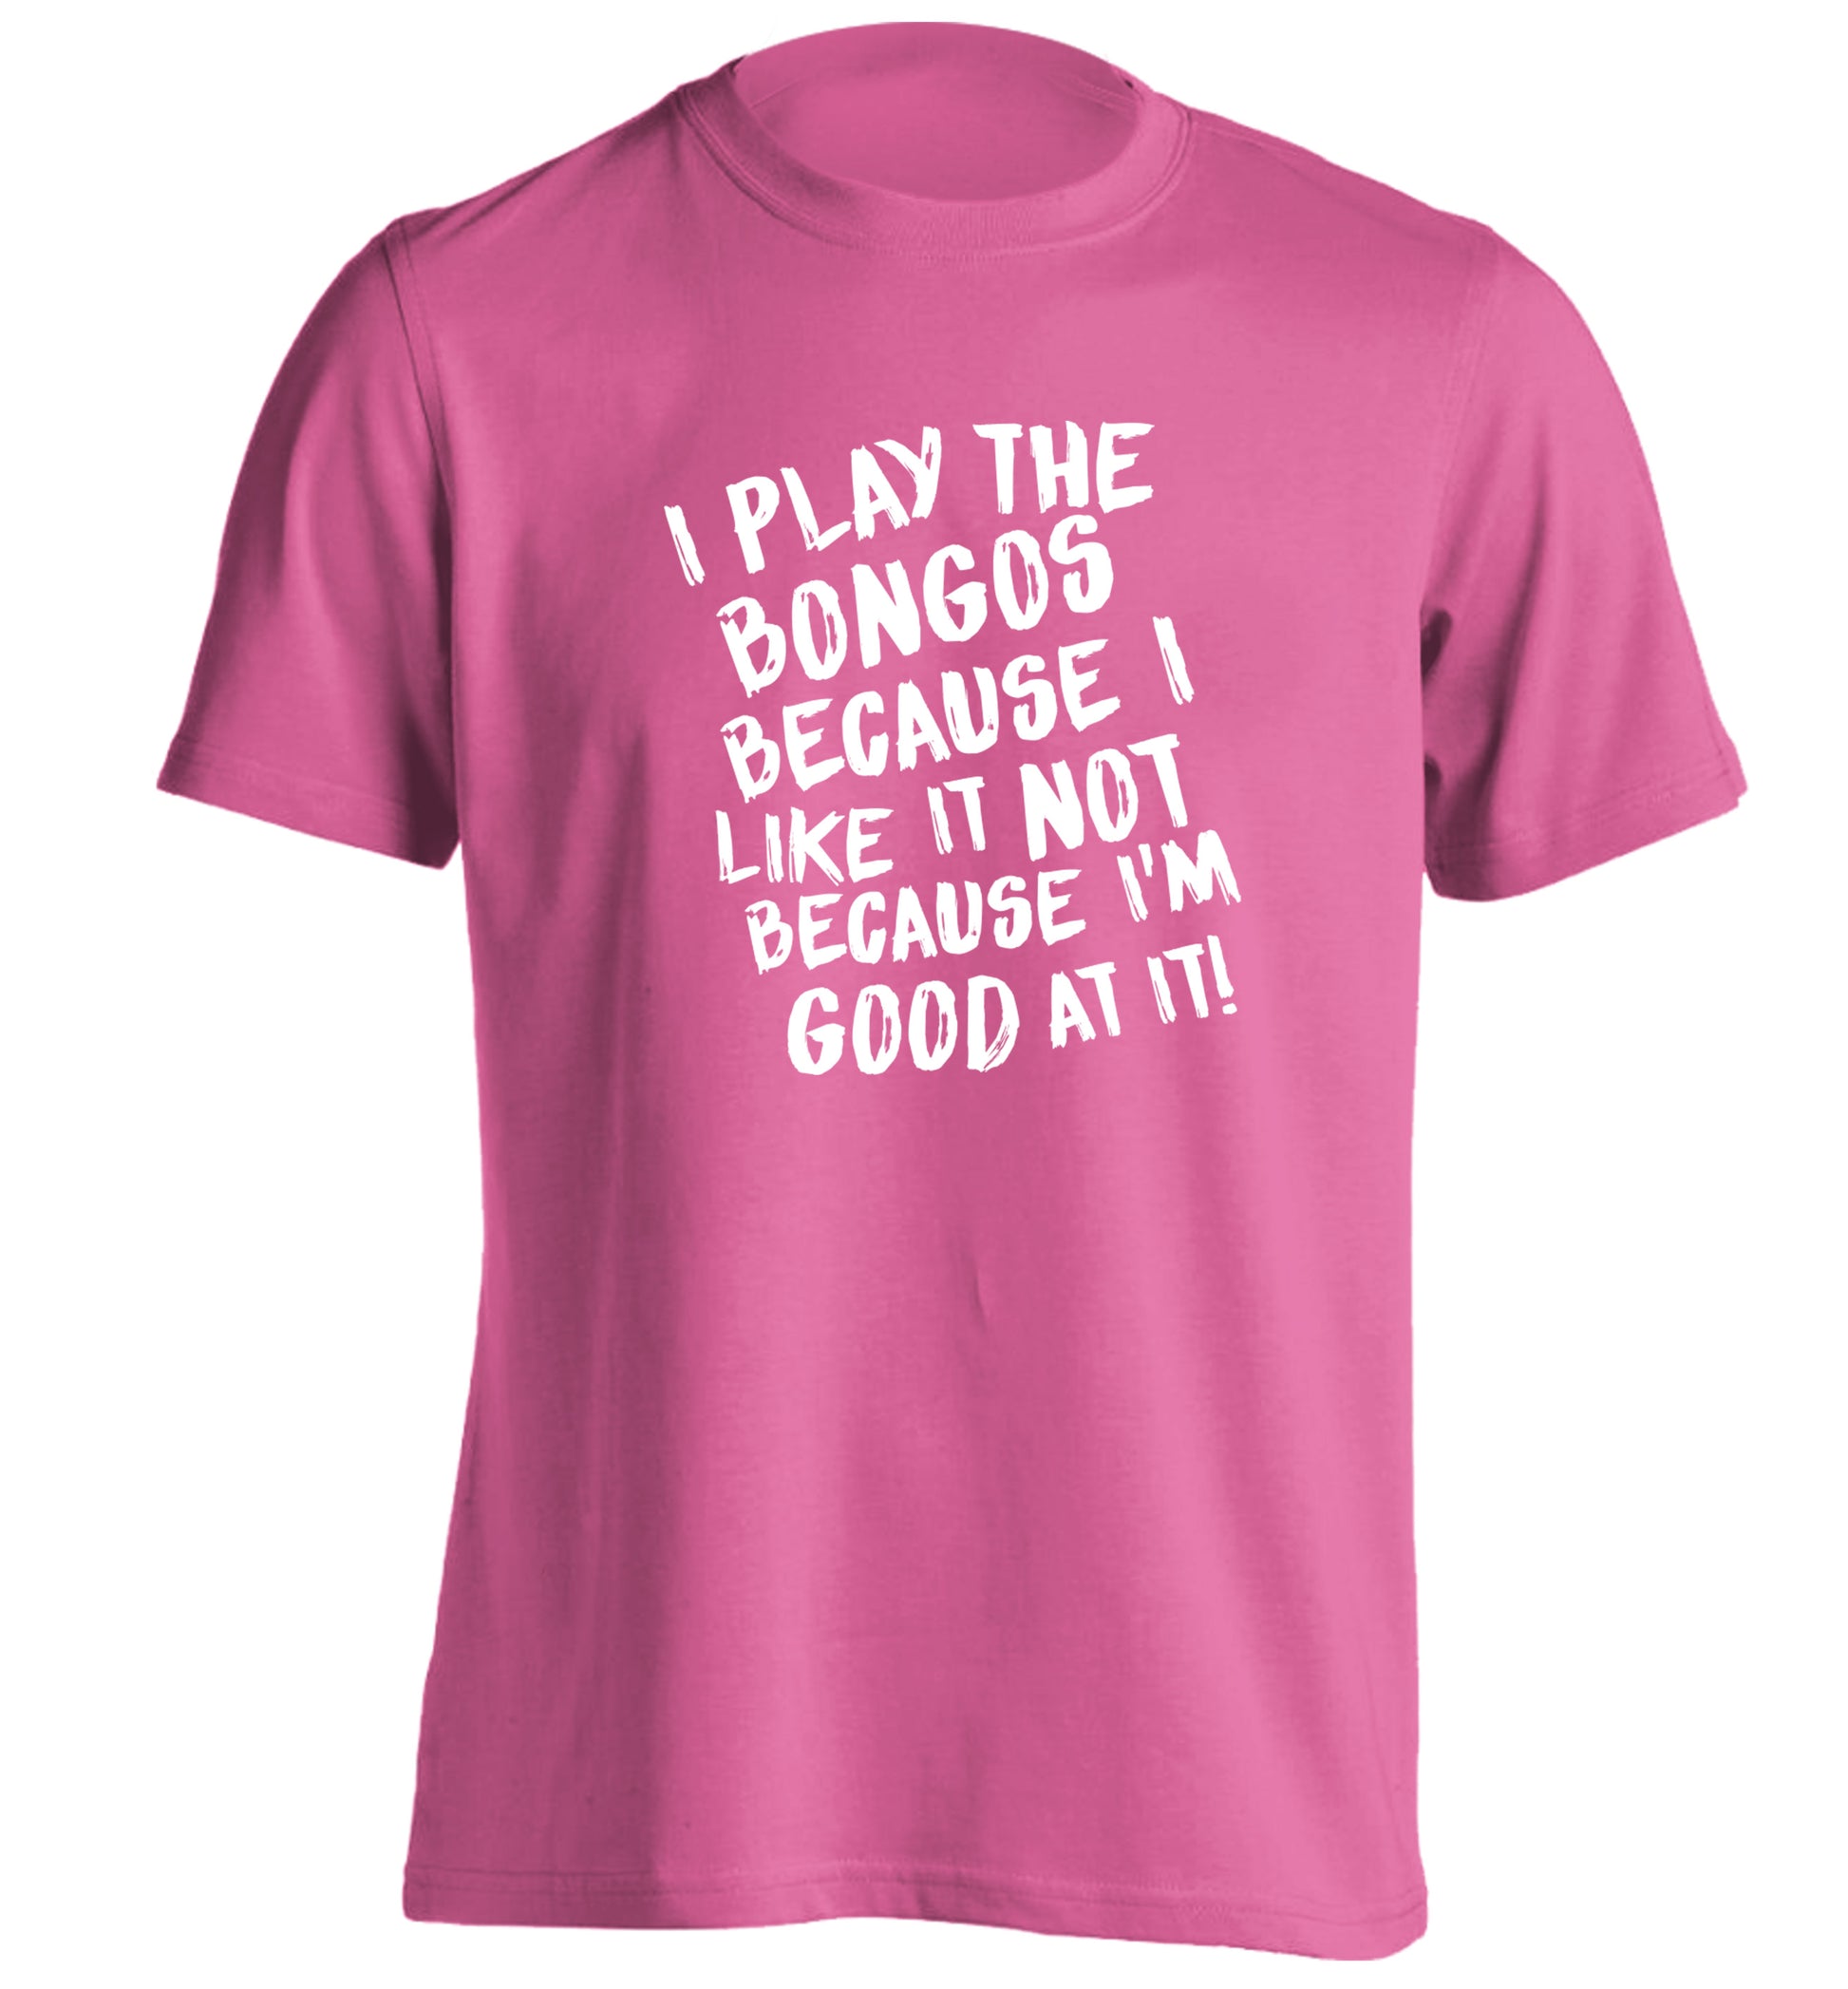 I play the bongos because I like it not because I'm good at it adults unisex pink Tshirt 2XL